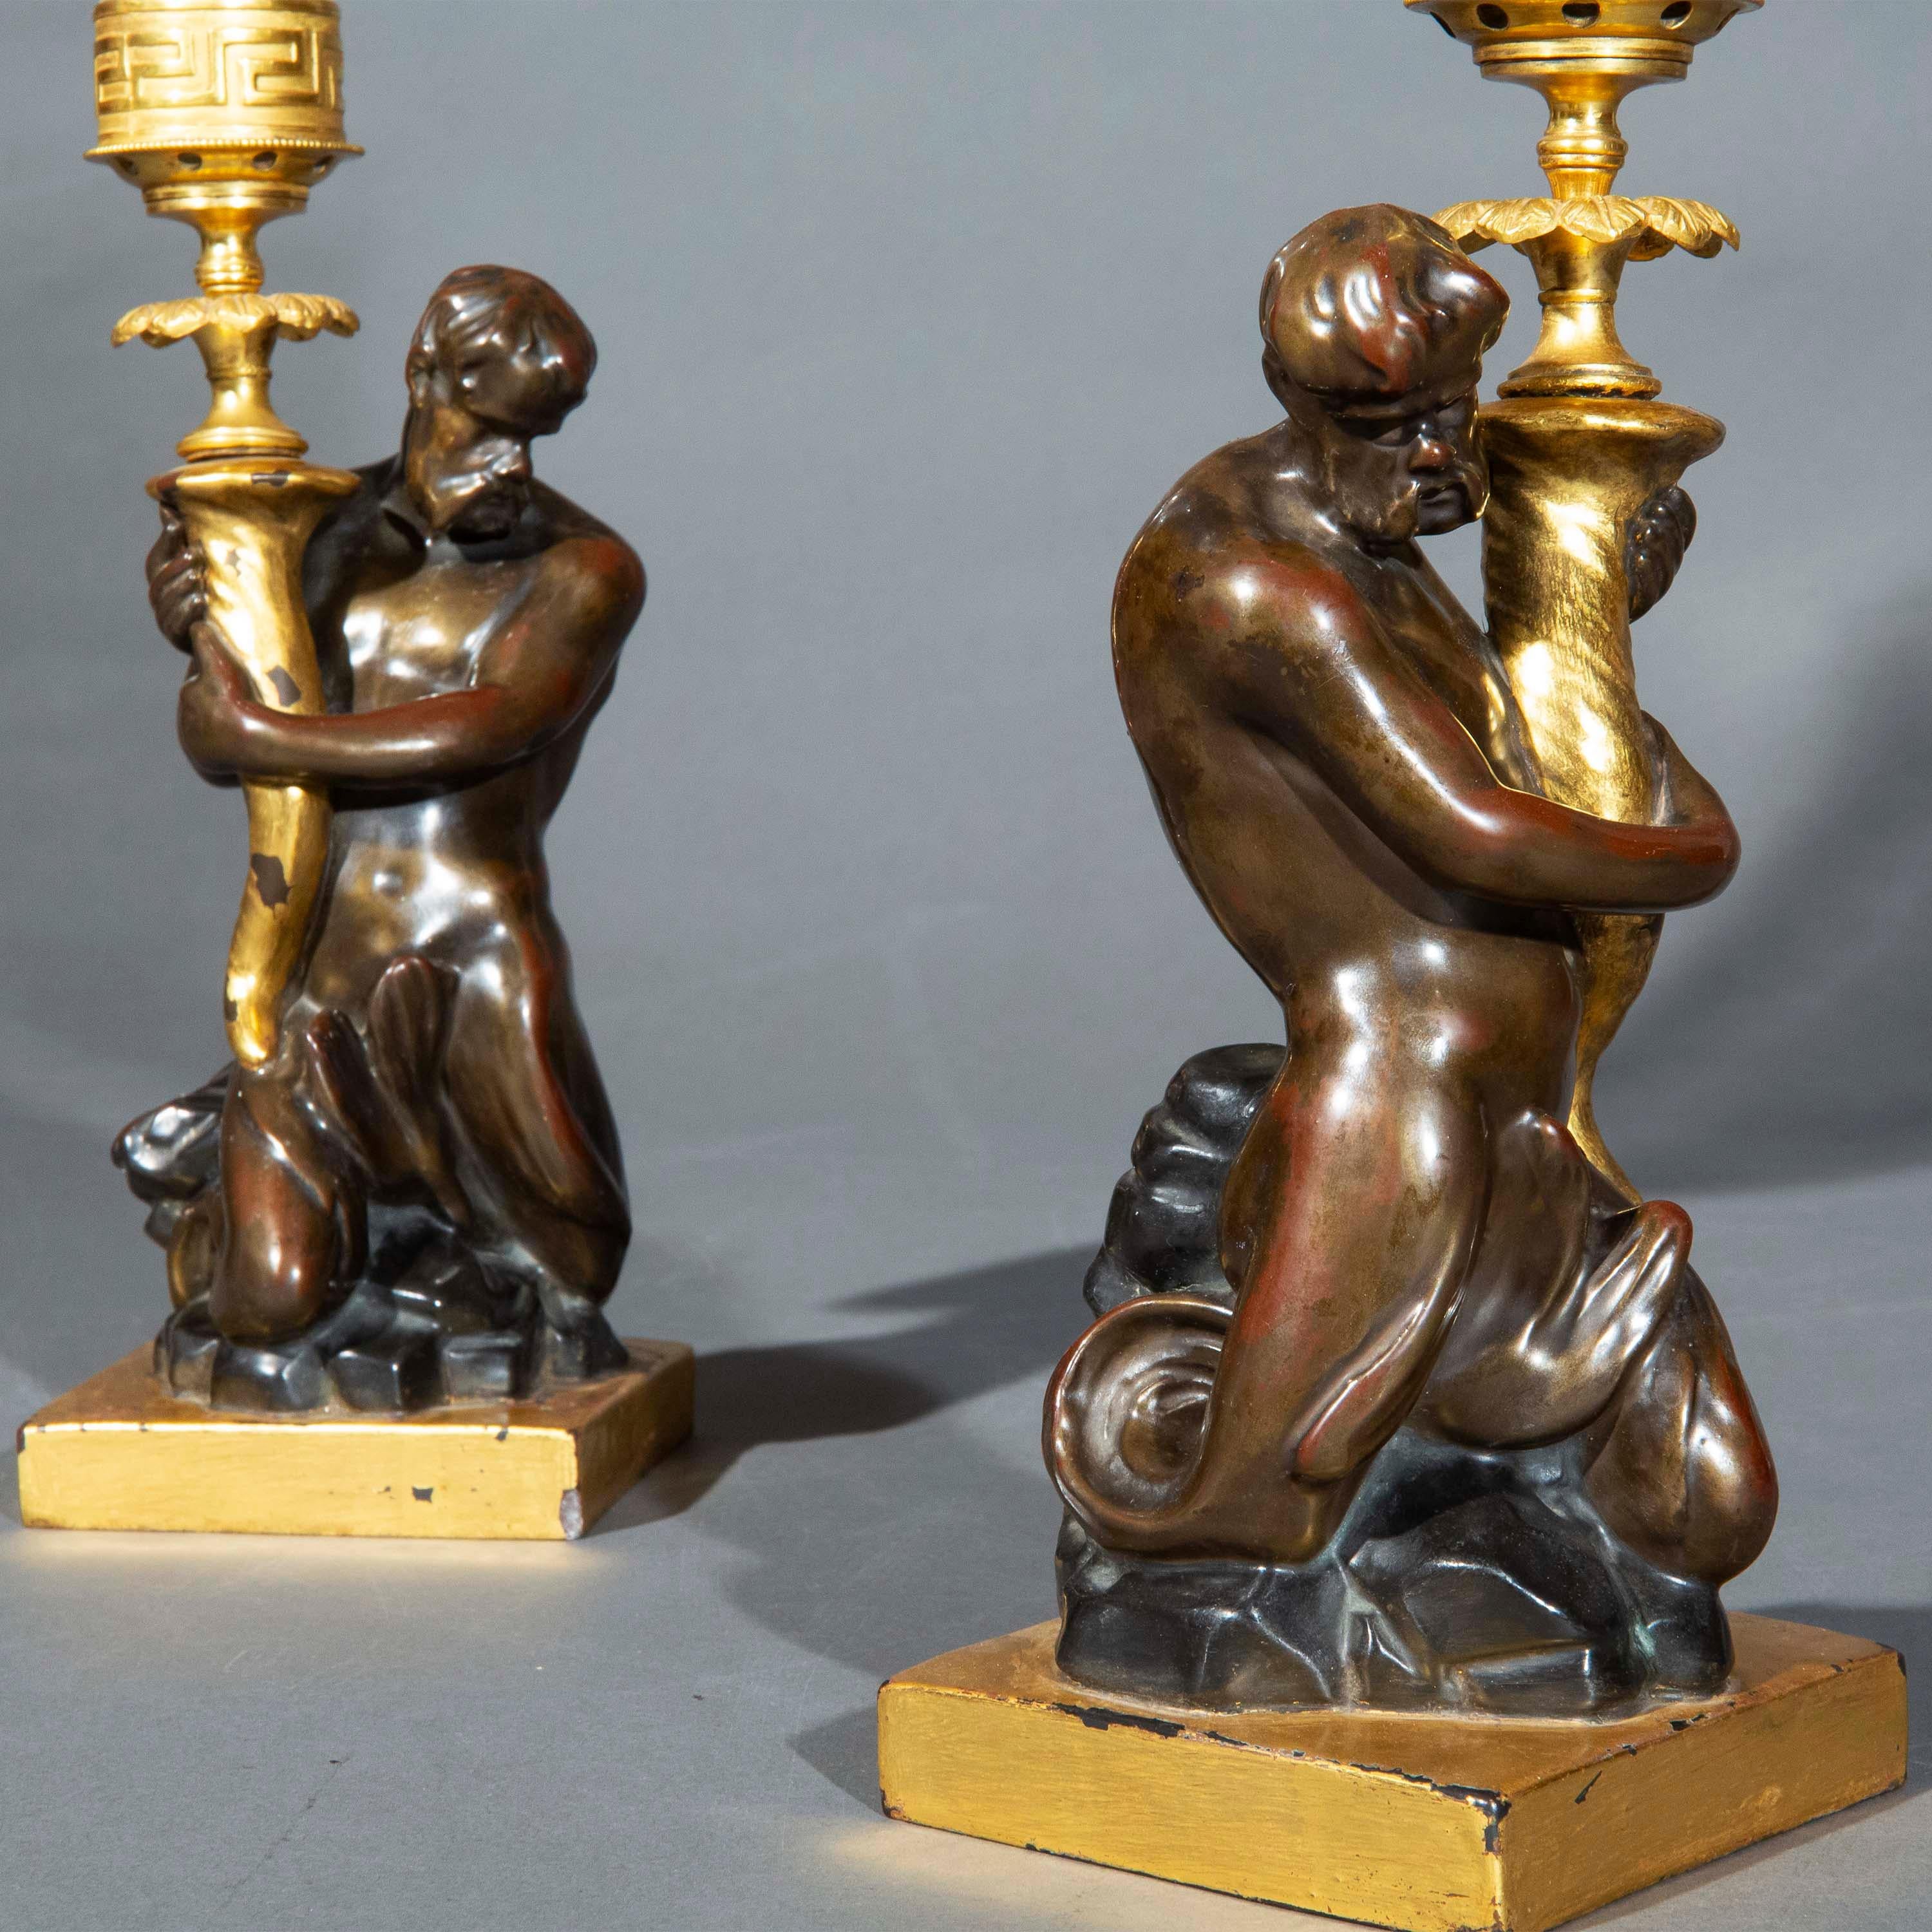 Pair of Early 19th Century Triton Candlesticks Storm Lanterns by Wood & Caldwell For Sale 2